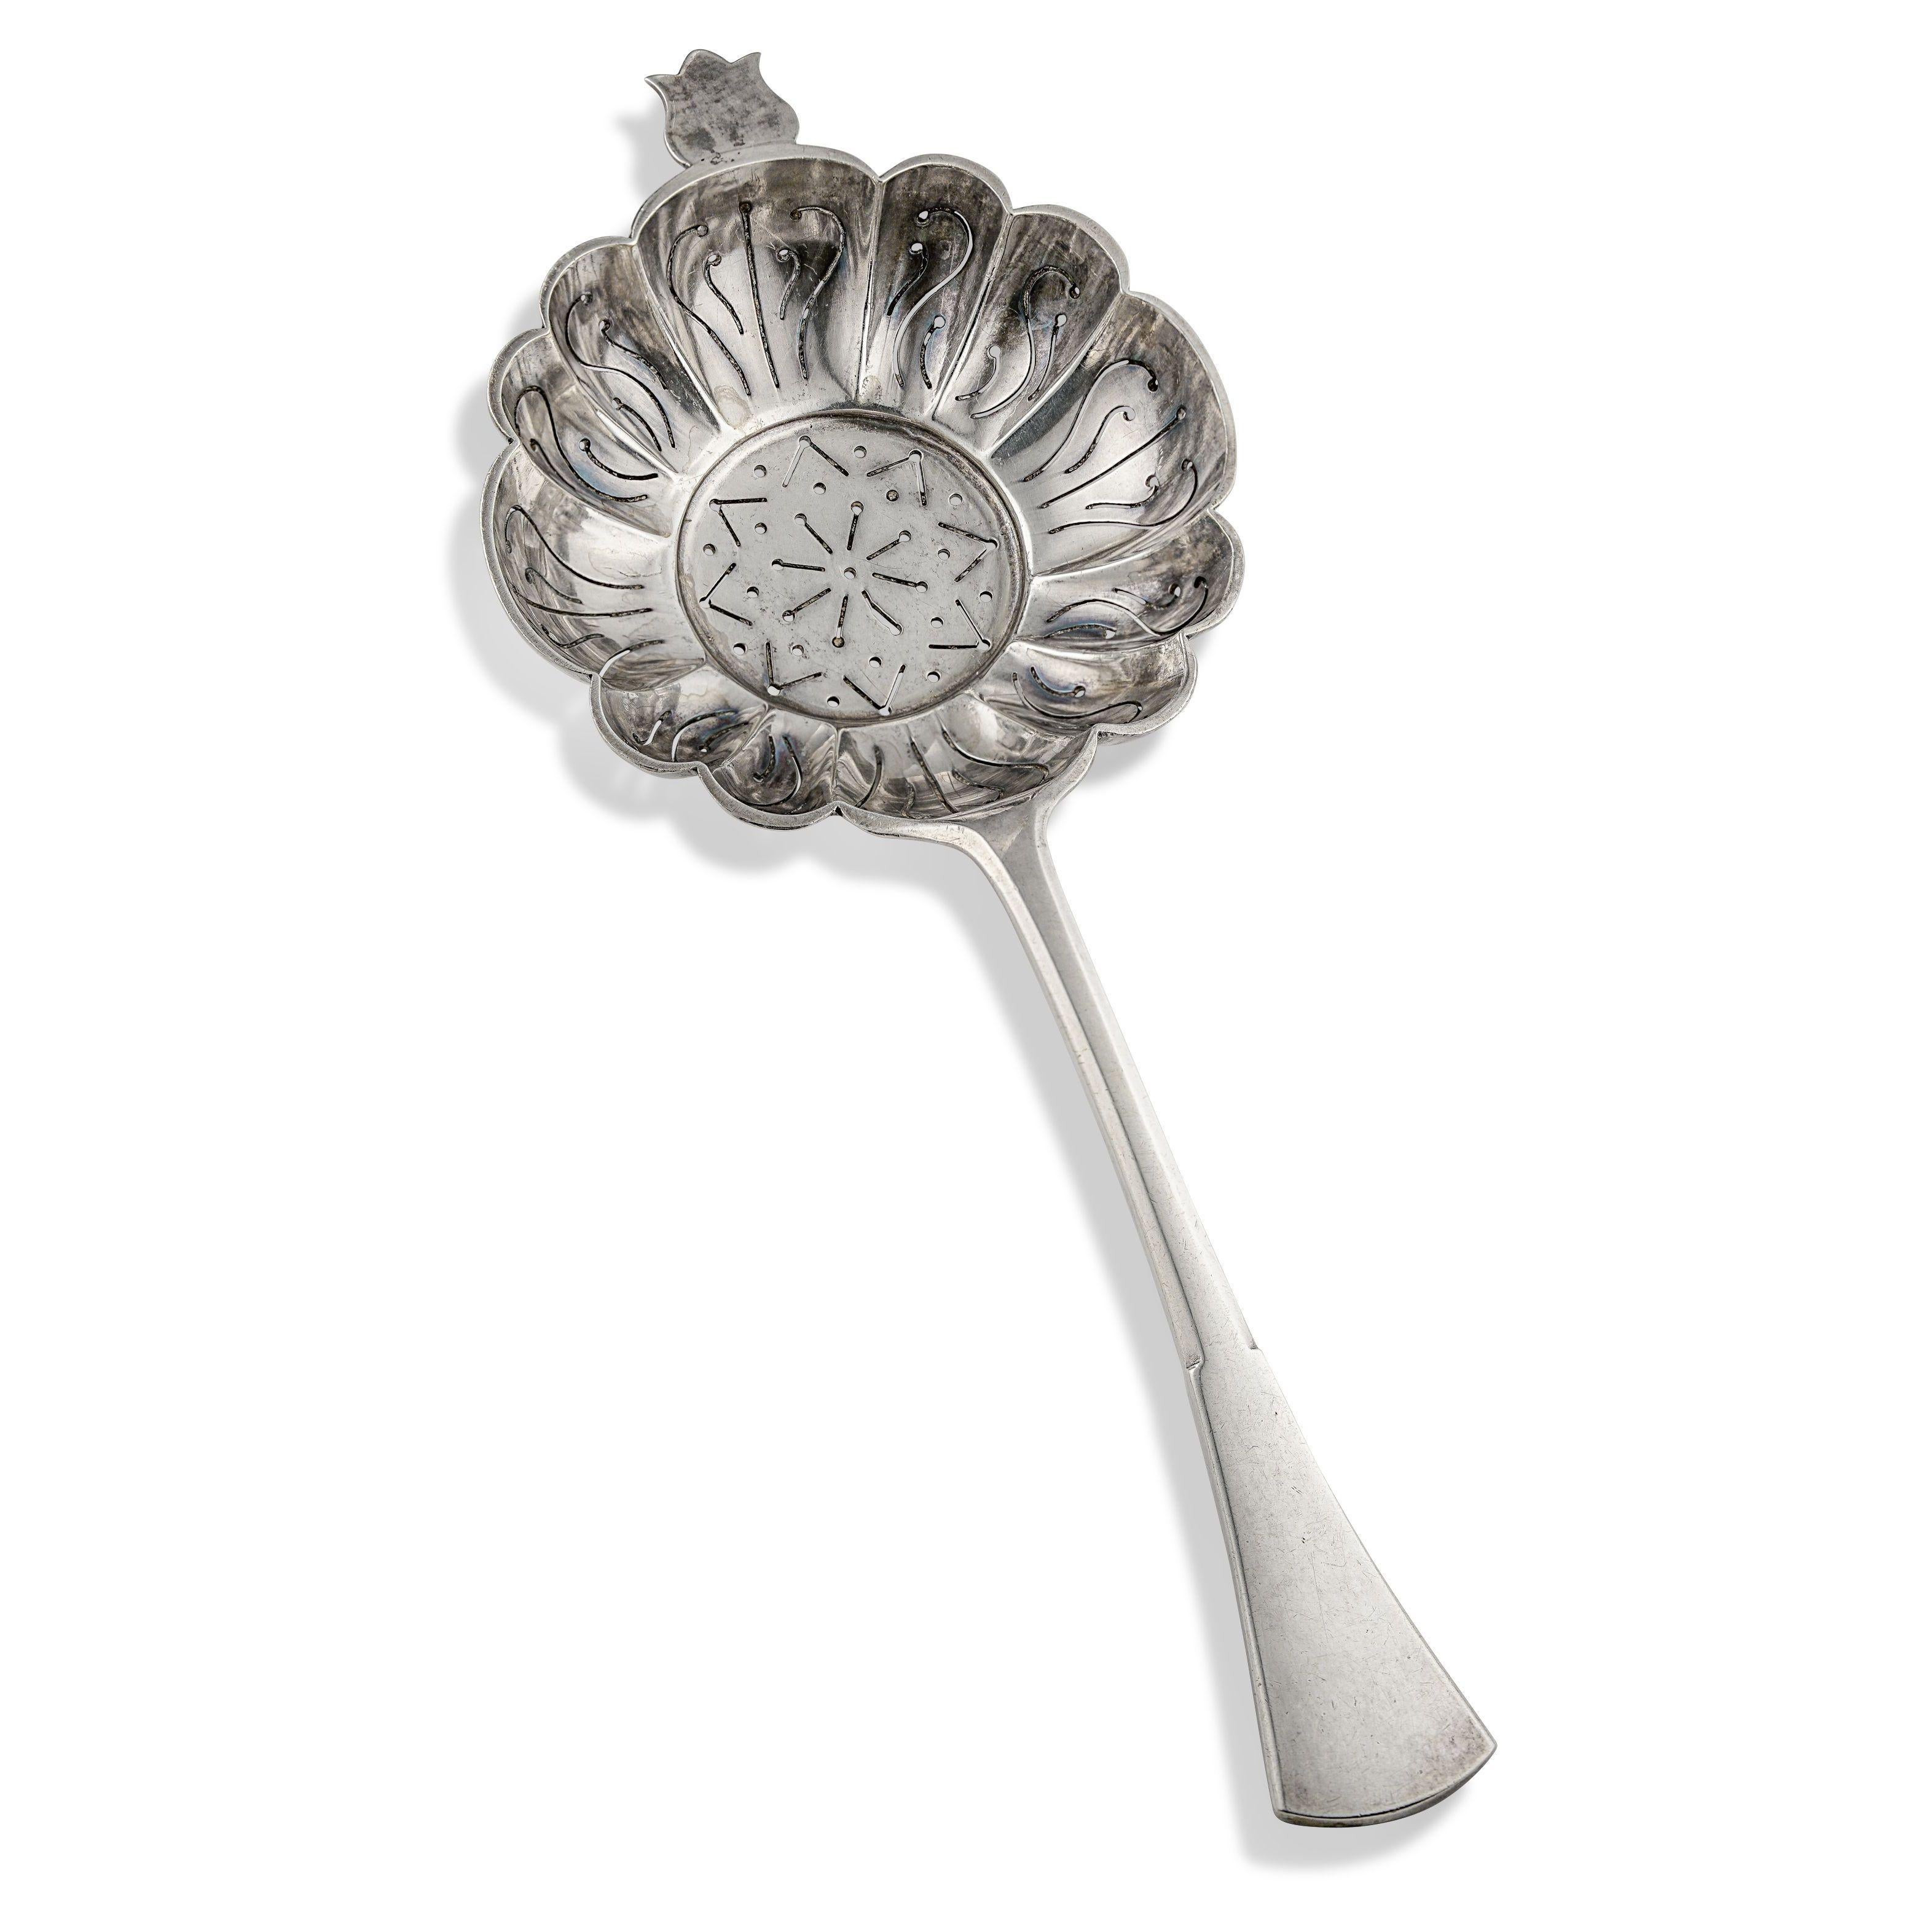 Fine quality Austrian Continental silver sugar sifter/Berry spoon, distinctive scalloped and beautifully pierced bowl. Simple handle with no engraving. Fine quality made from heavy gauge Silver, weighing approx. 94.75g. Measuring approx. 8” long